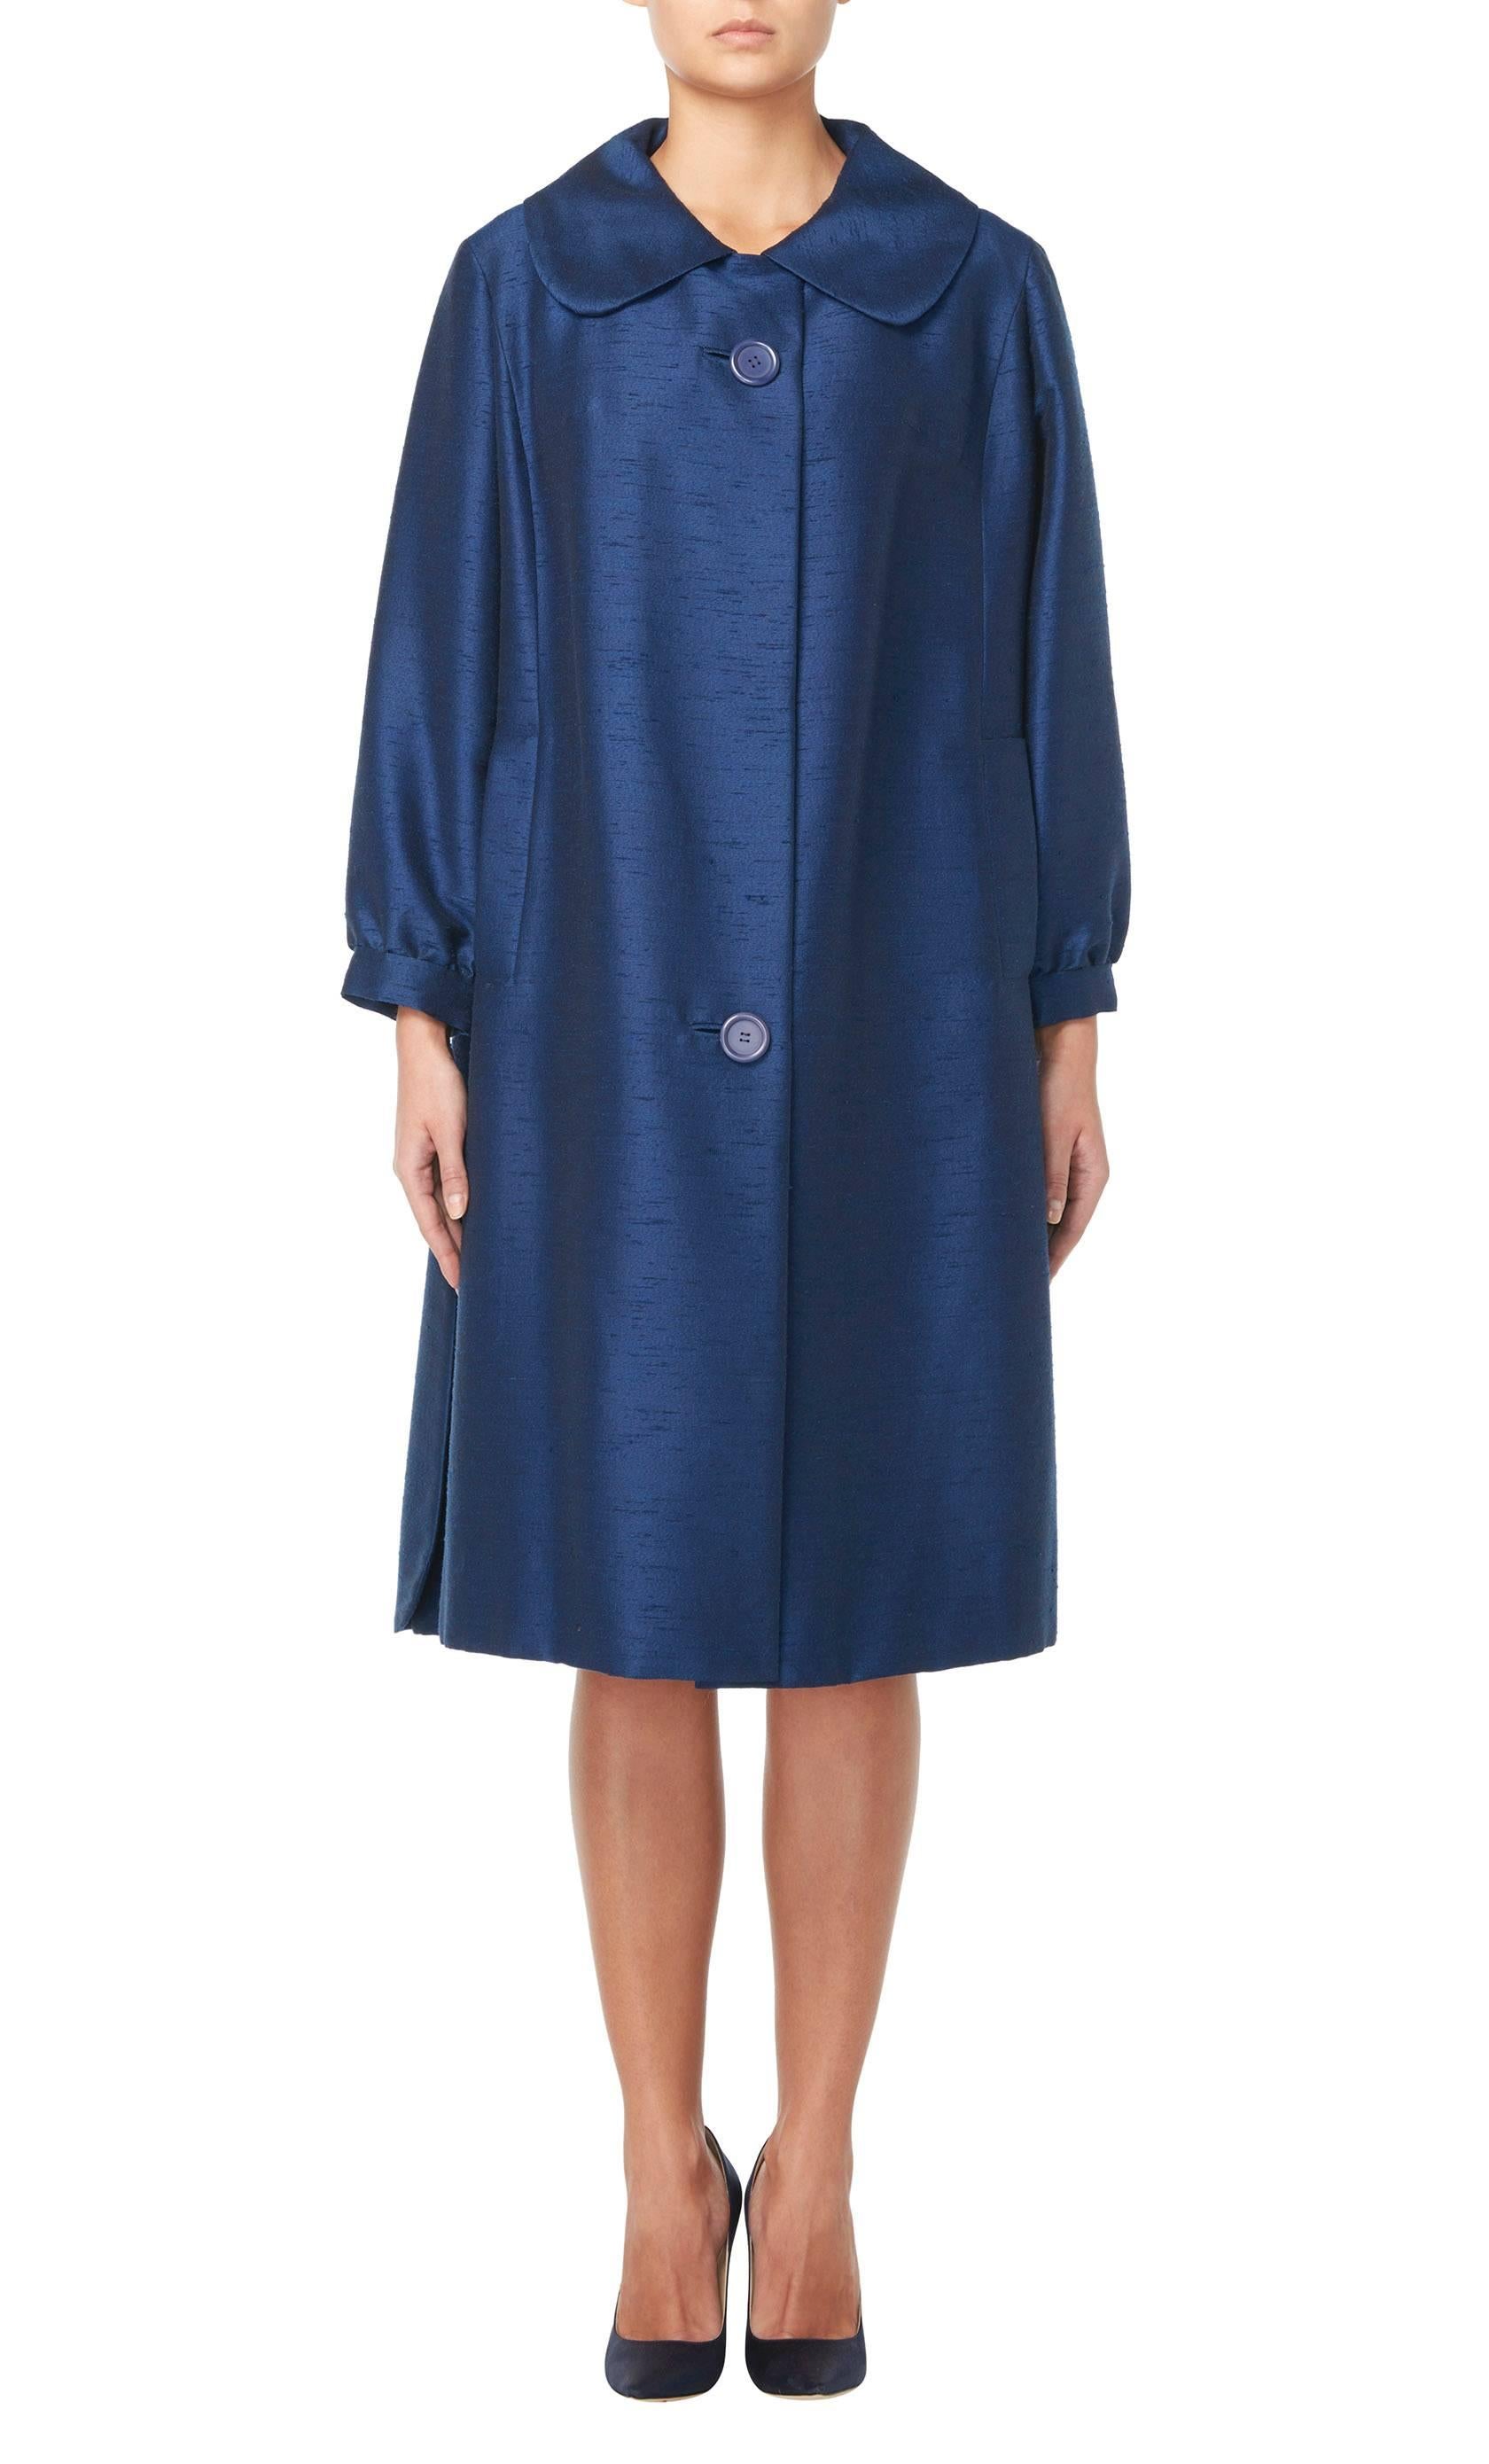 This Lanvin coat is constructed in blue slubbed silk has a flattering swing cut and would be a wonderful option for evenings. Featuring a Peter Pan collar, bracelet length sleeves and inside pockets on the hip, the coat fastens with two large